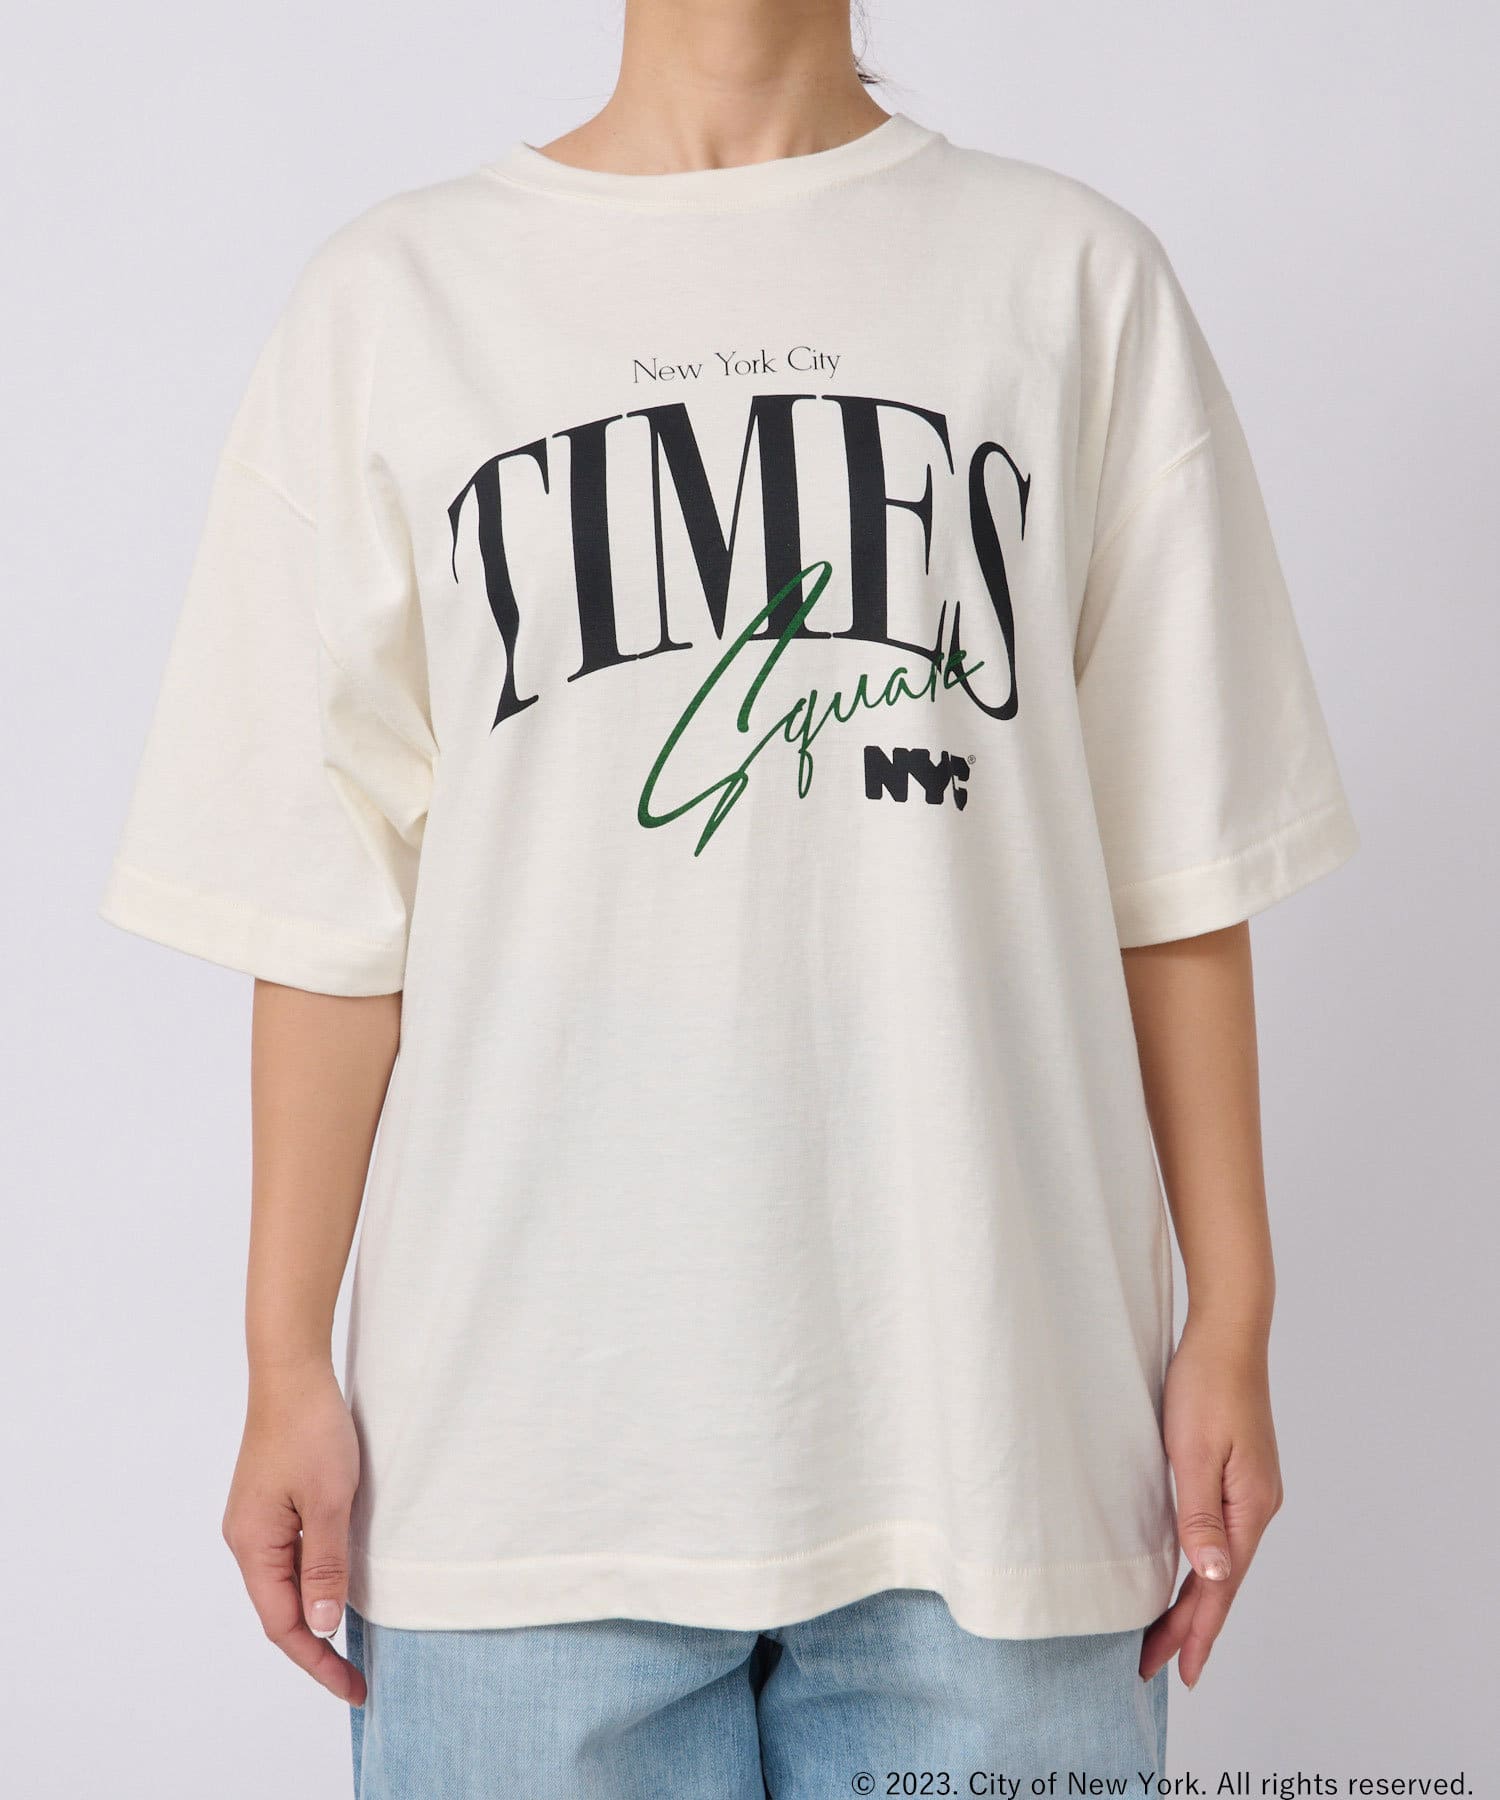 RIVE DROITE(リヴドロワ) 予約【GOOD ROCK SPEED】NYC TIMES SQUARE Tシャツ